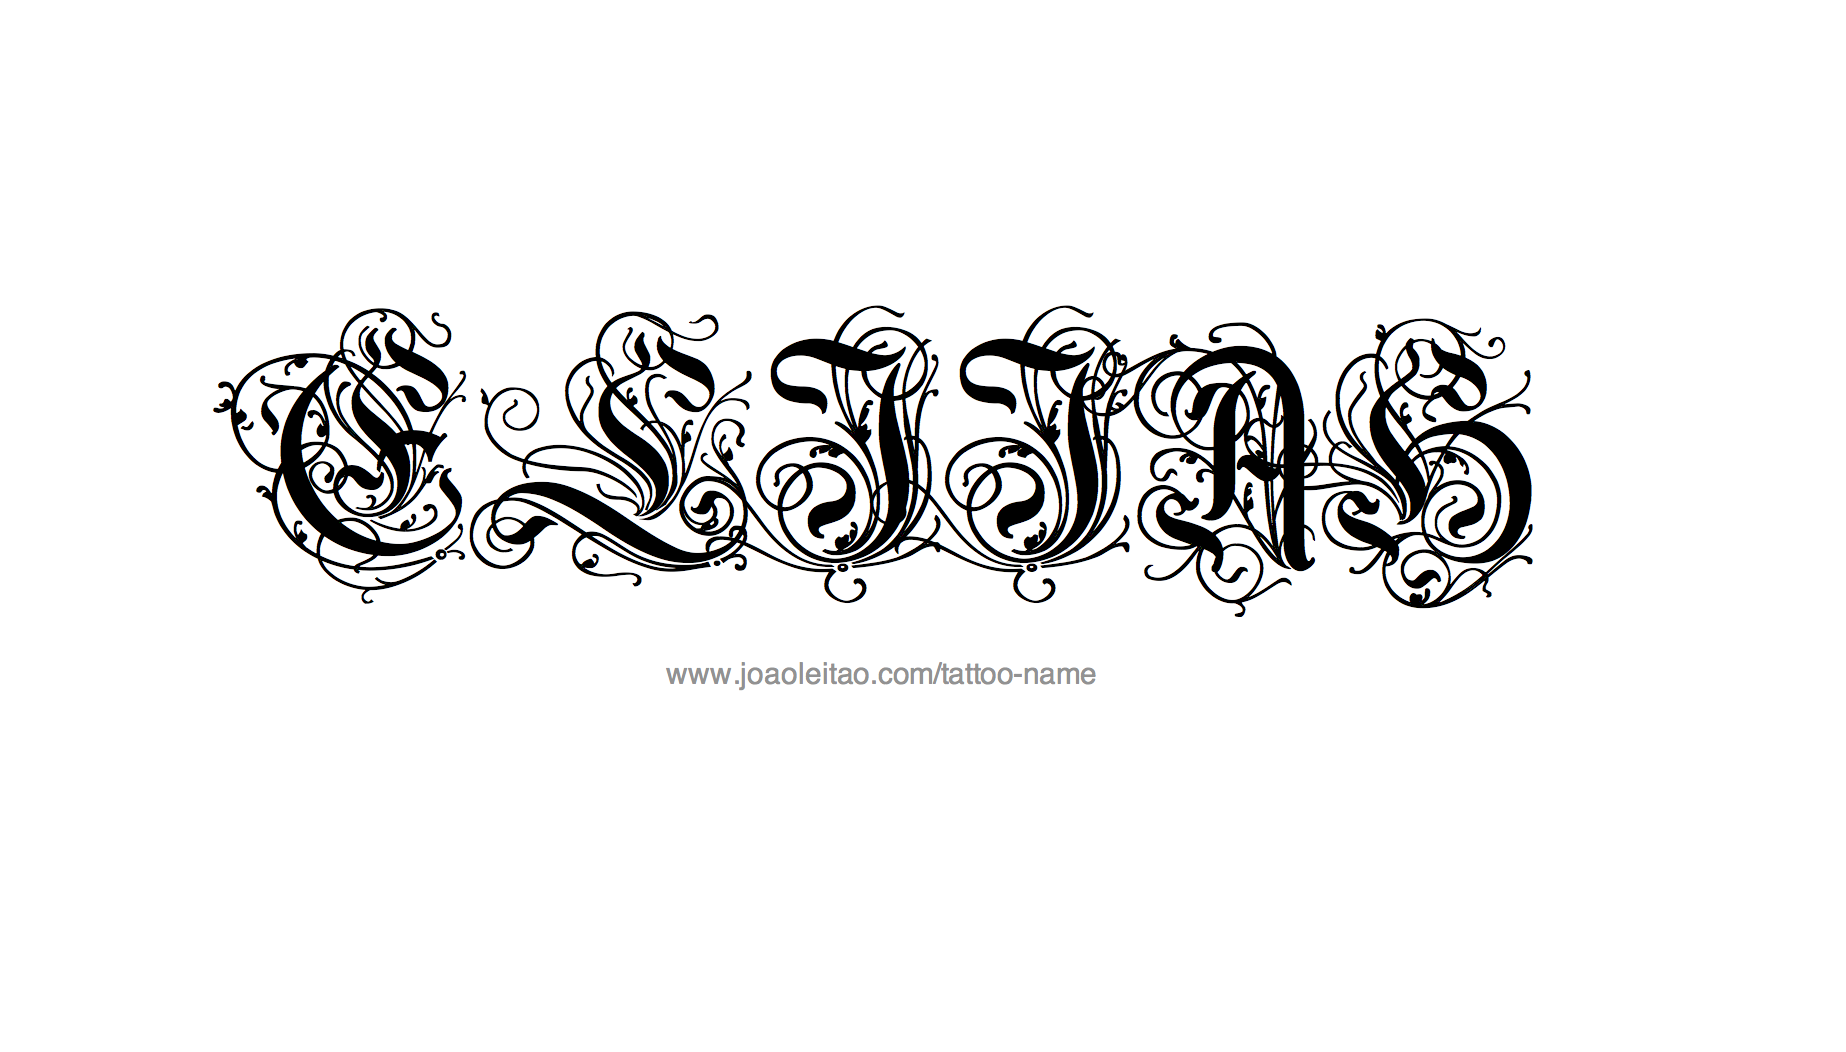 Font for Name Tattoo Designs